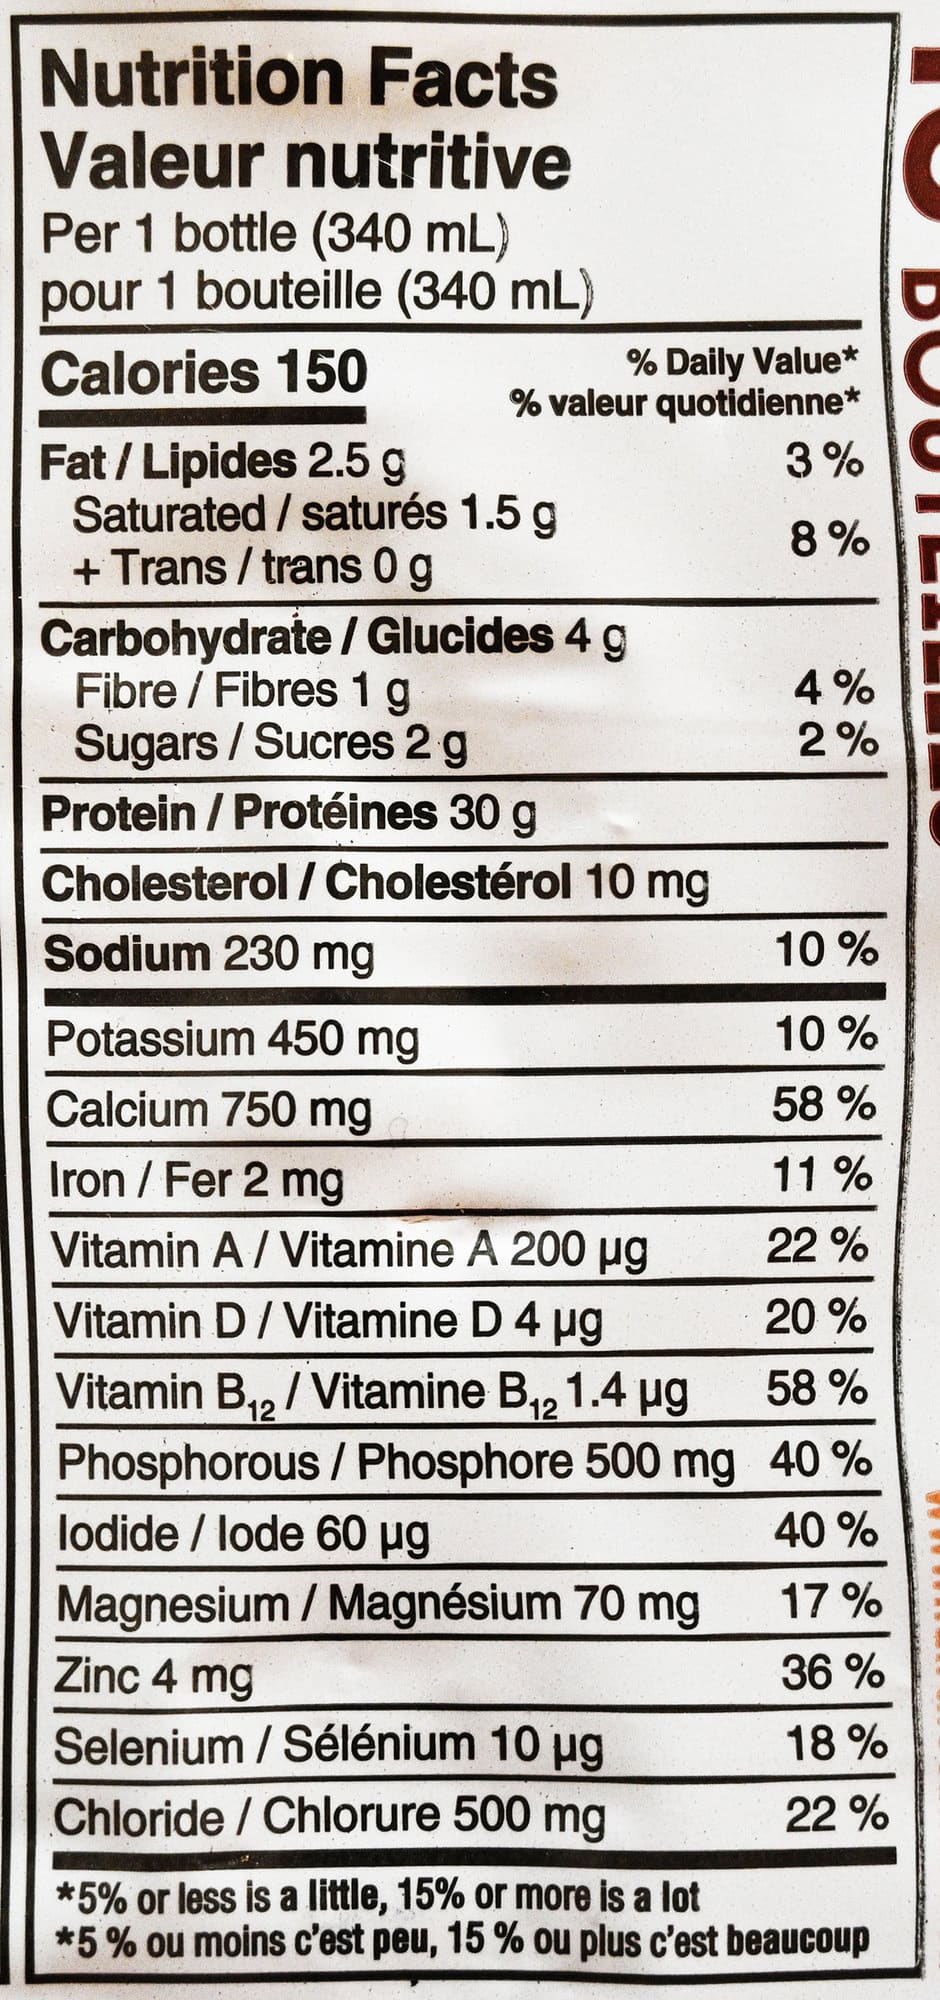 Image of the nutrition facts for the Fairlife chocolate protein shakes.